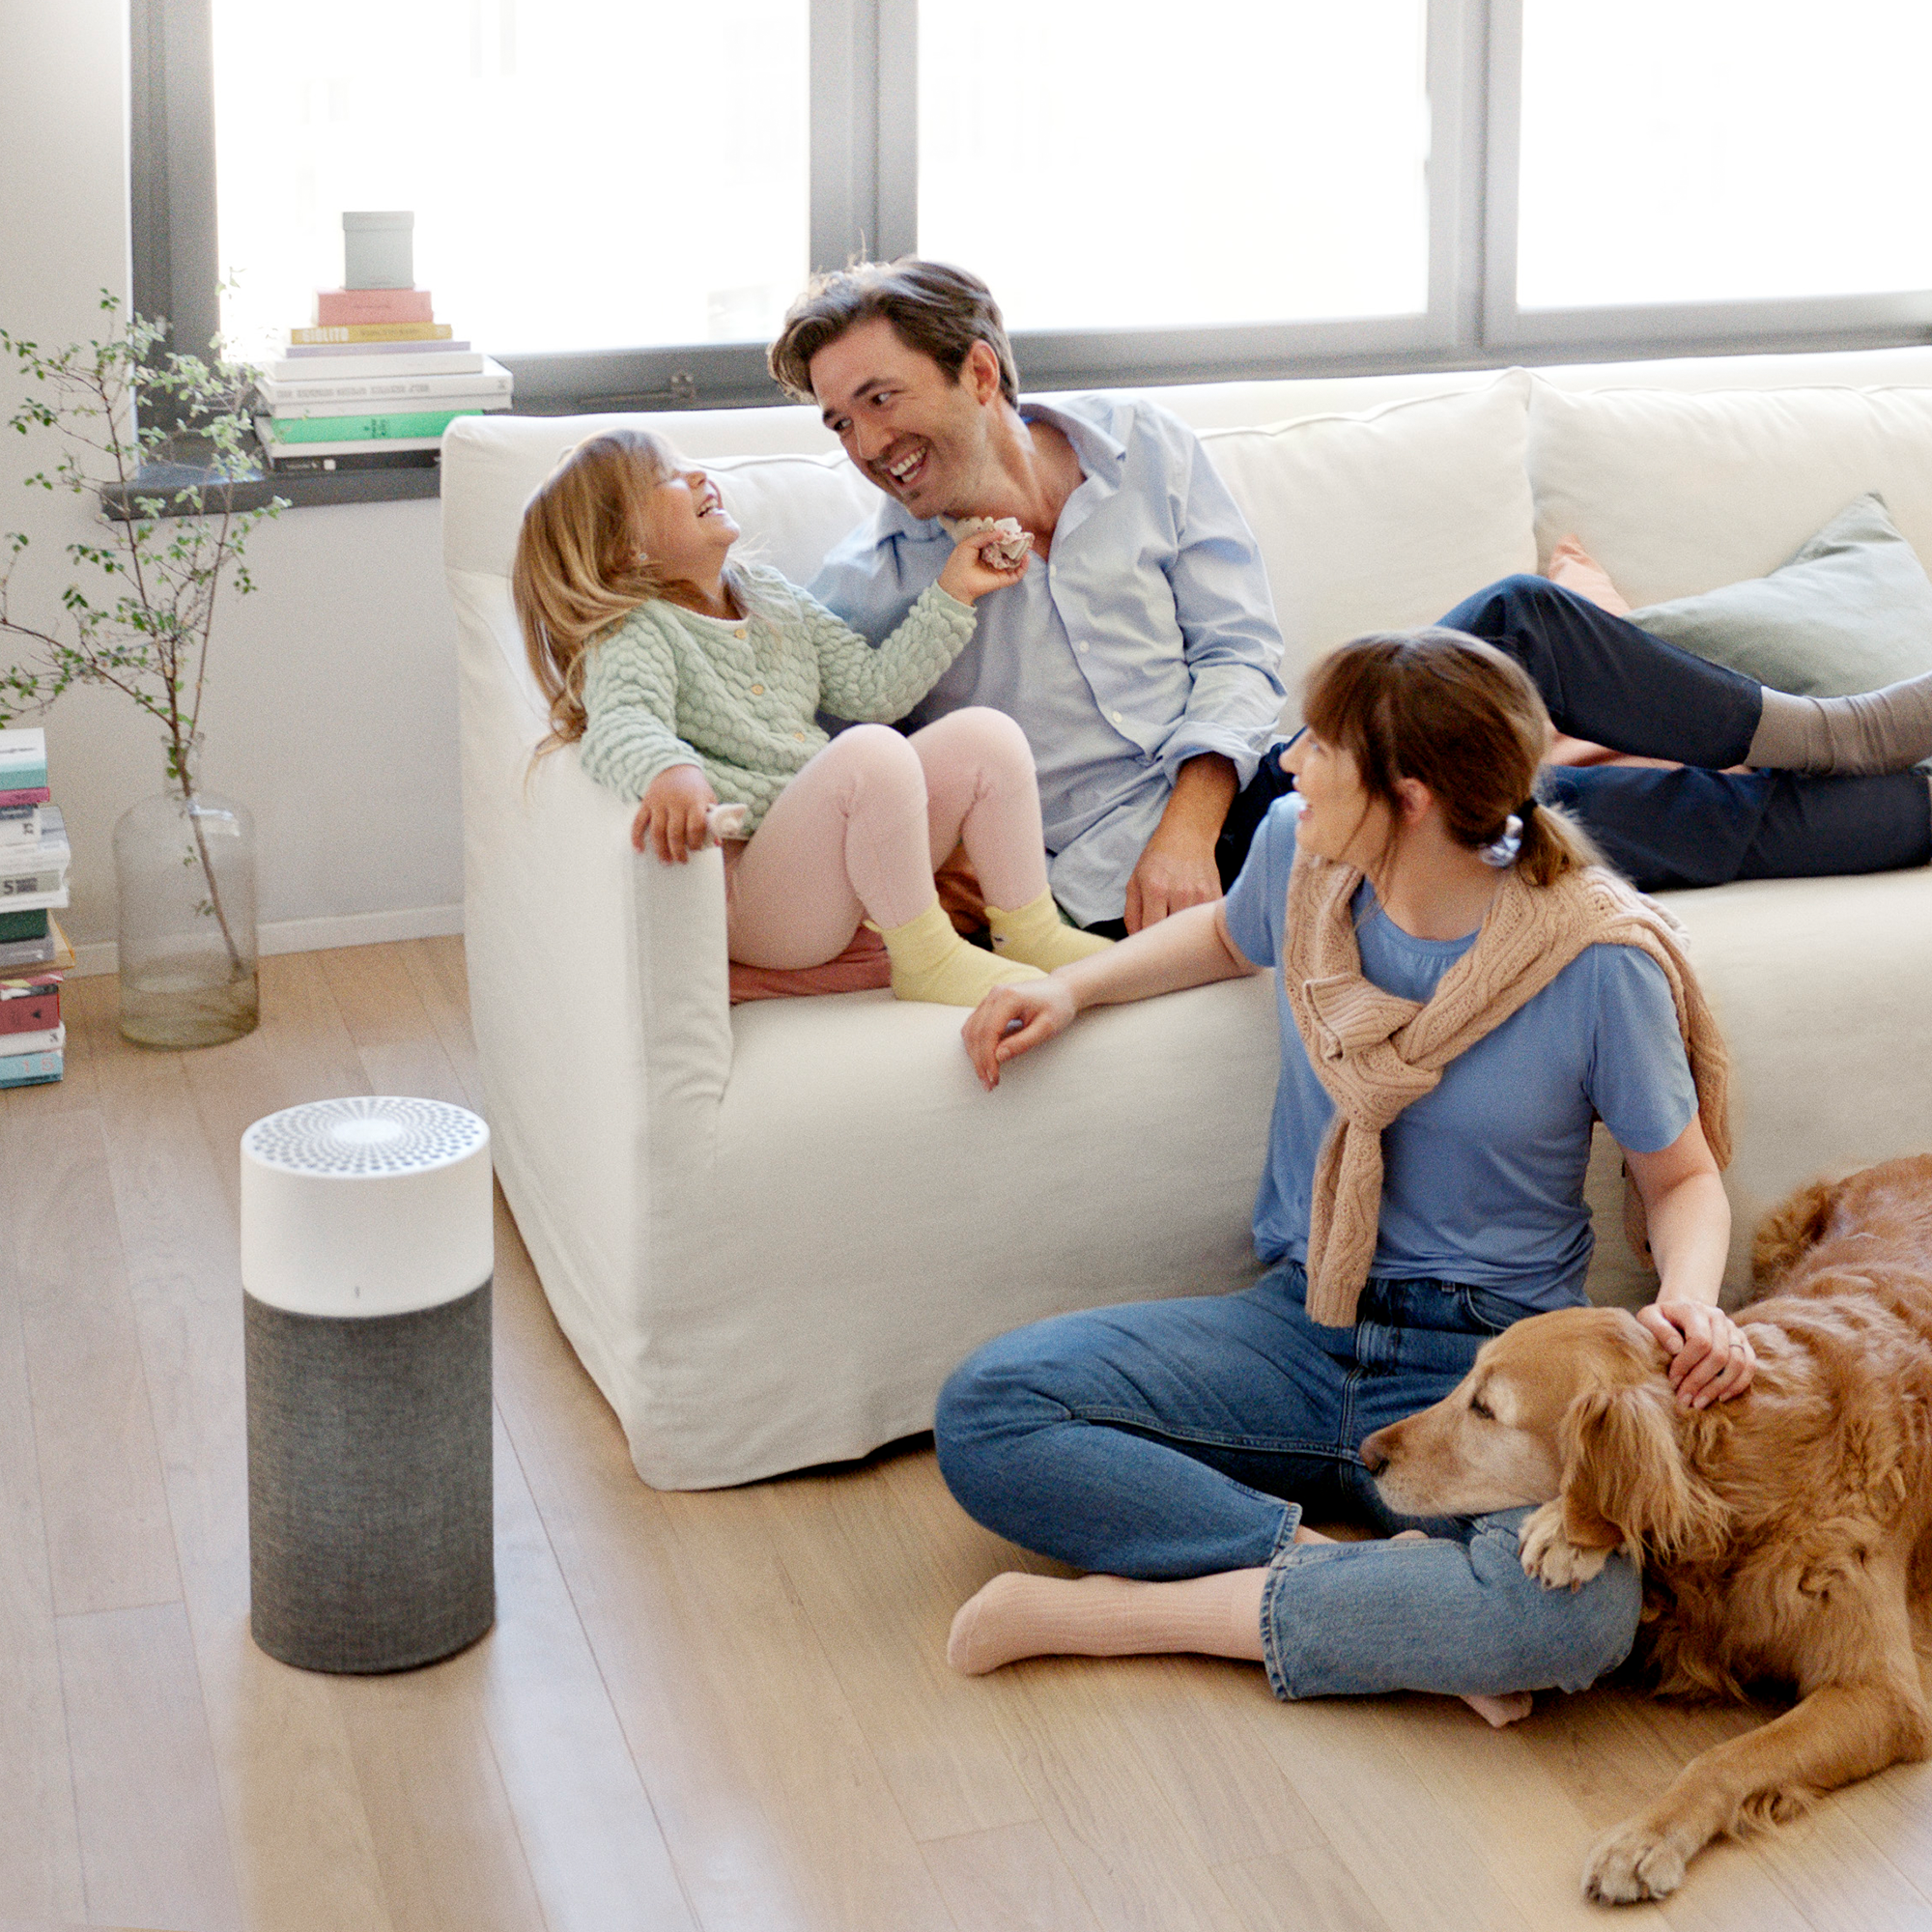 Blueair Blue Pure 411 auto air purifier in room with family